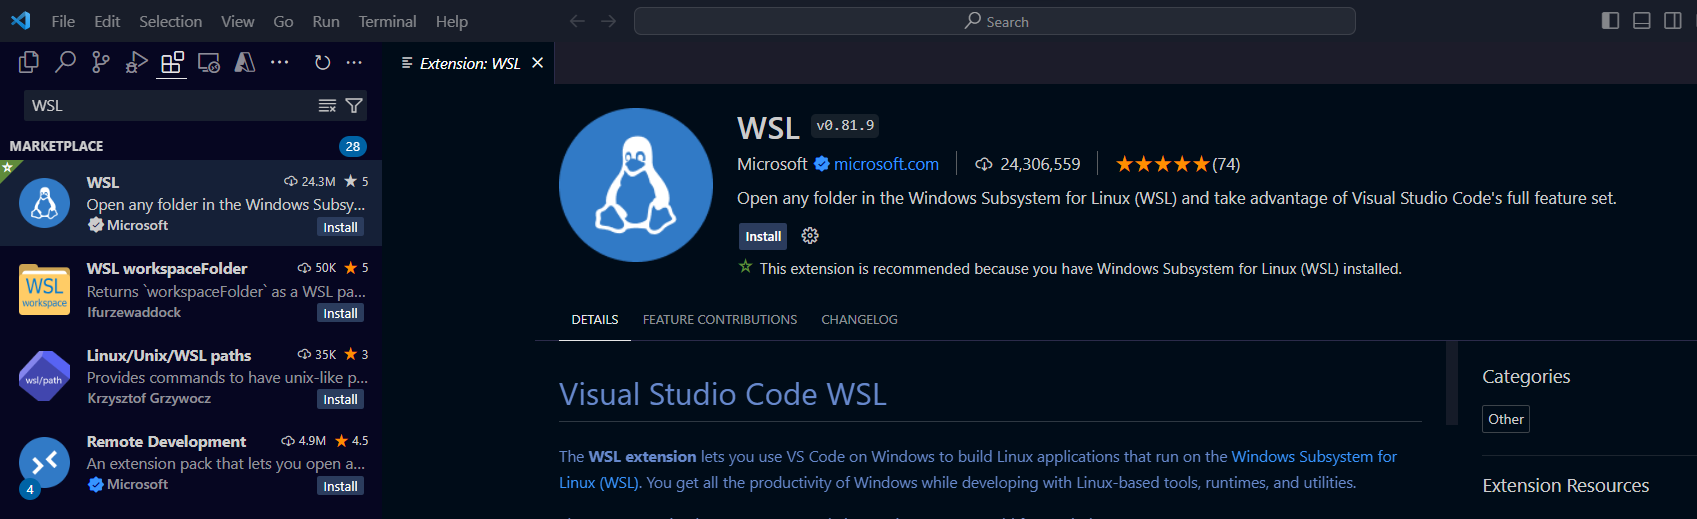 Screenshot of the Visual Studio Code Extensions tab with WSL extension showing.